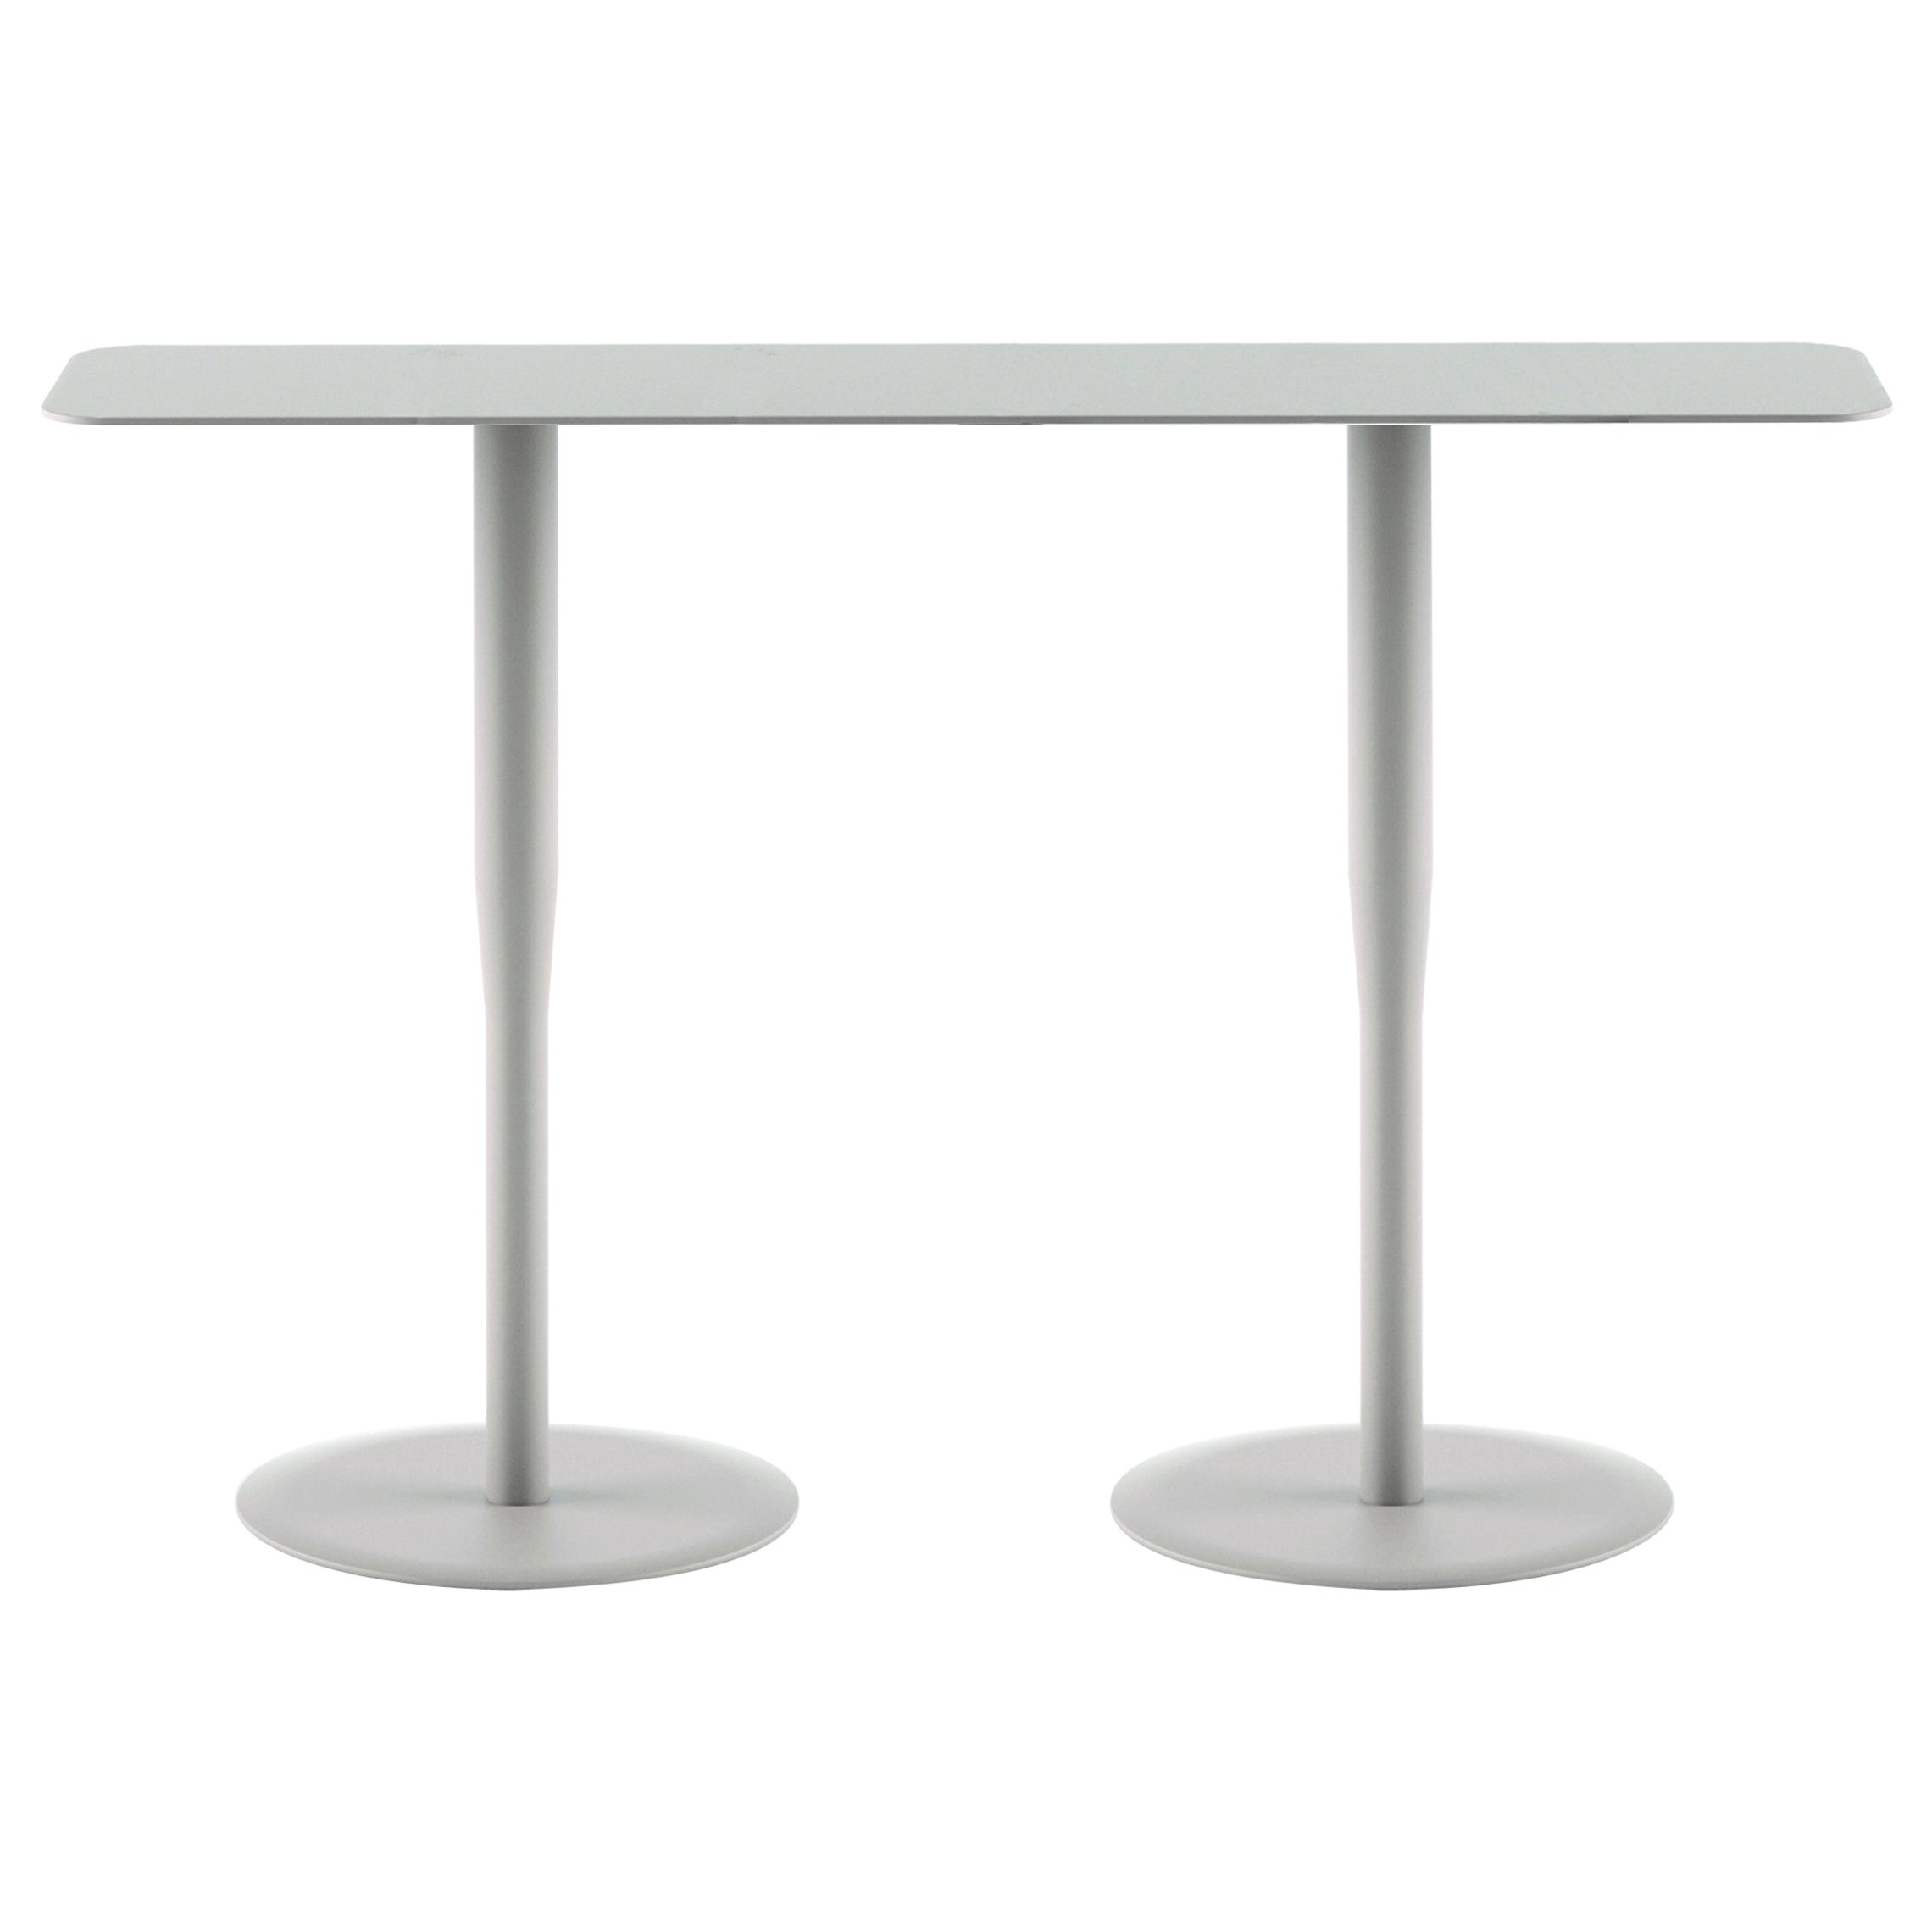 Alias Atlas Large Base Table in Sand Top with Lacquered Aluminium Frame For Sale